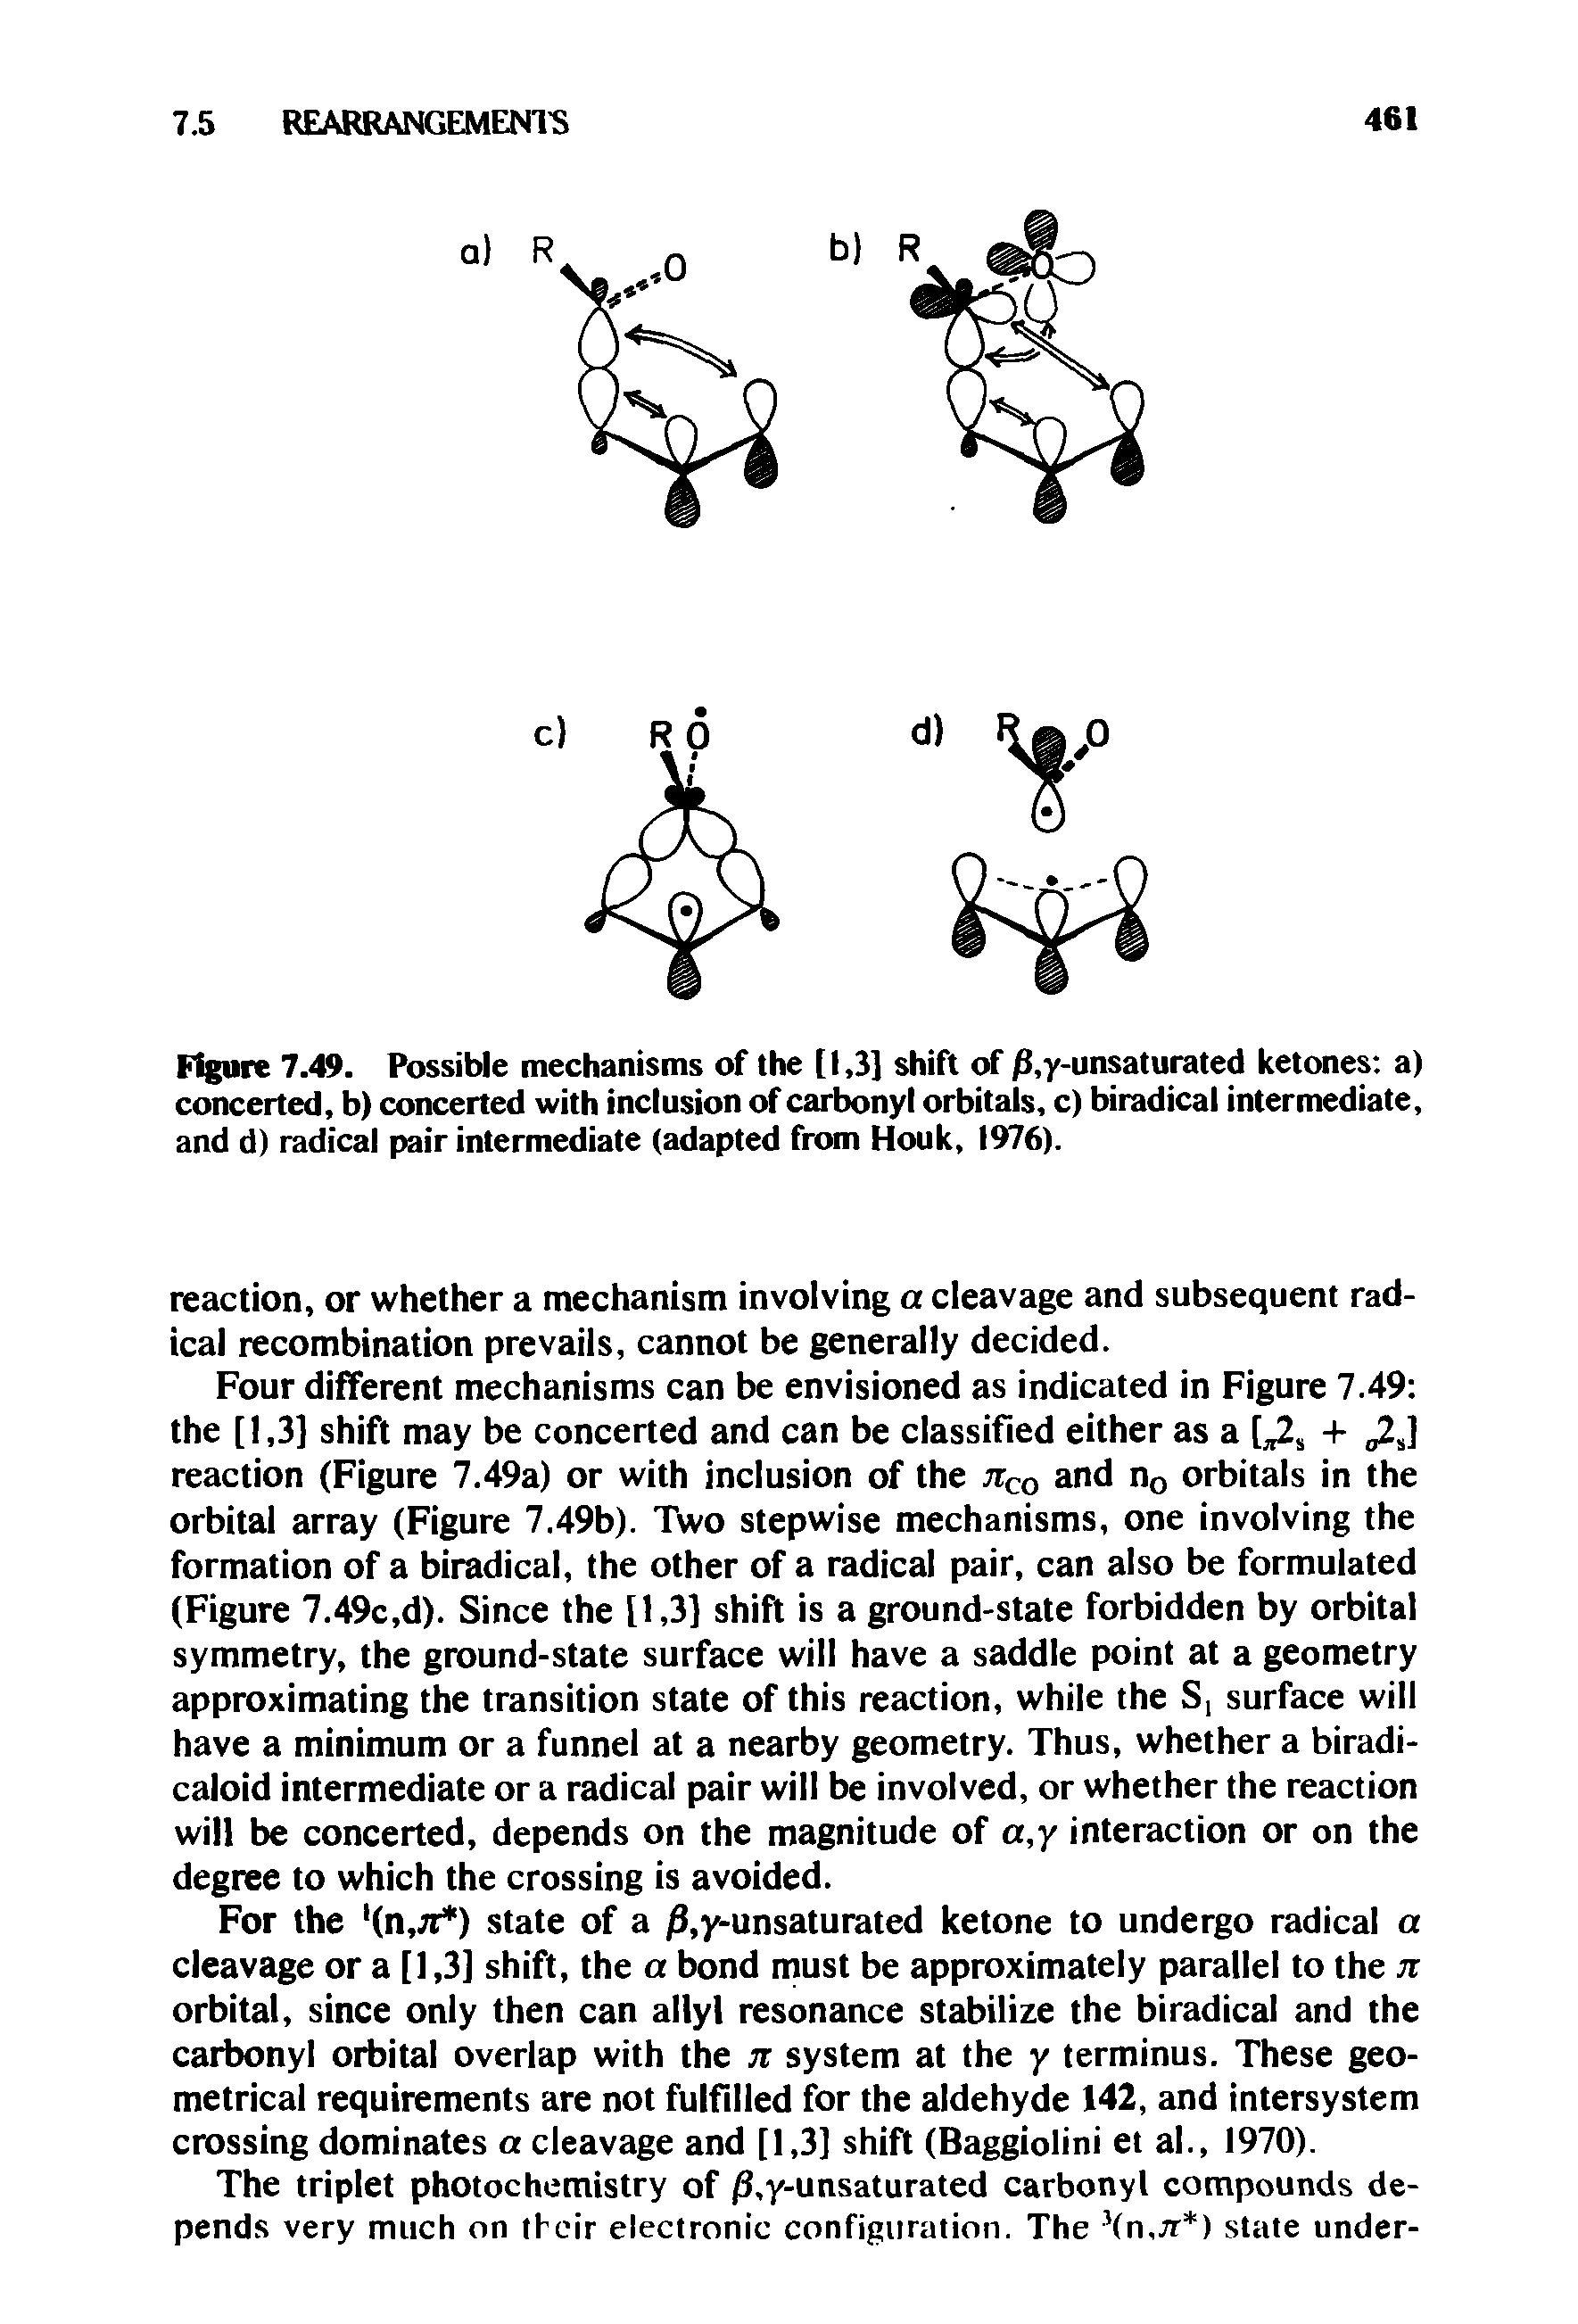 Figure 7.49. Possible mechanisms of the [1.3] shift of /3,y-unsaturated ketones a) concerted, b) concerted with inclusion of carbonyl orbitals, c) biradical intermediate, and d) radical pair intermediate (adapted from Houk, 1976).